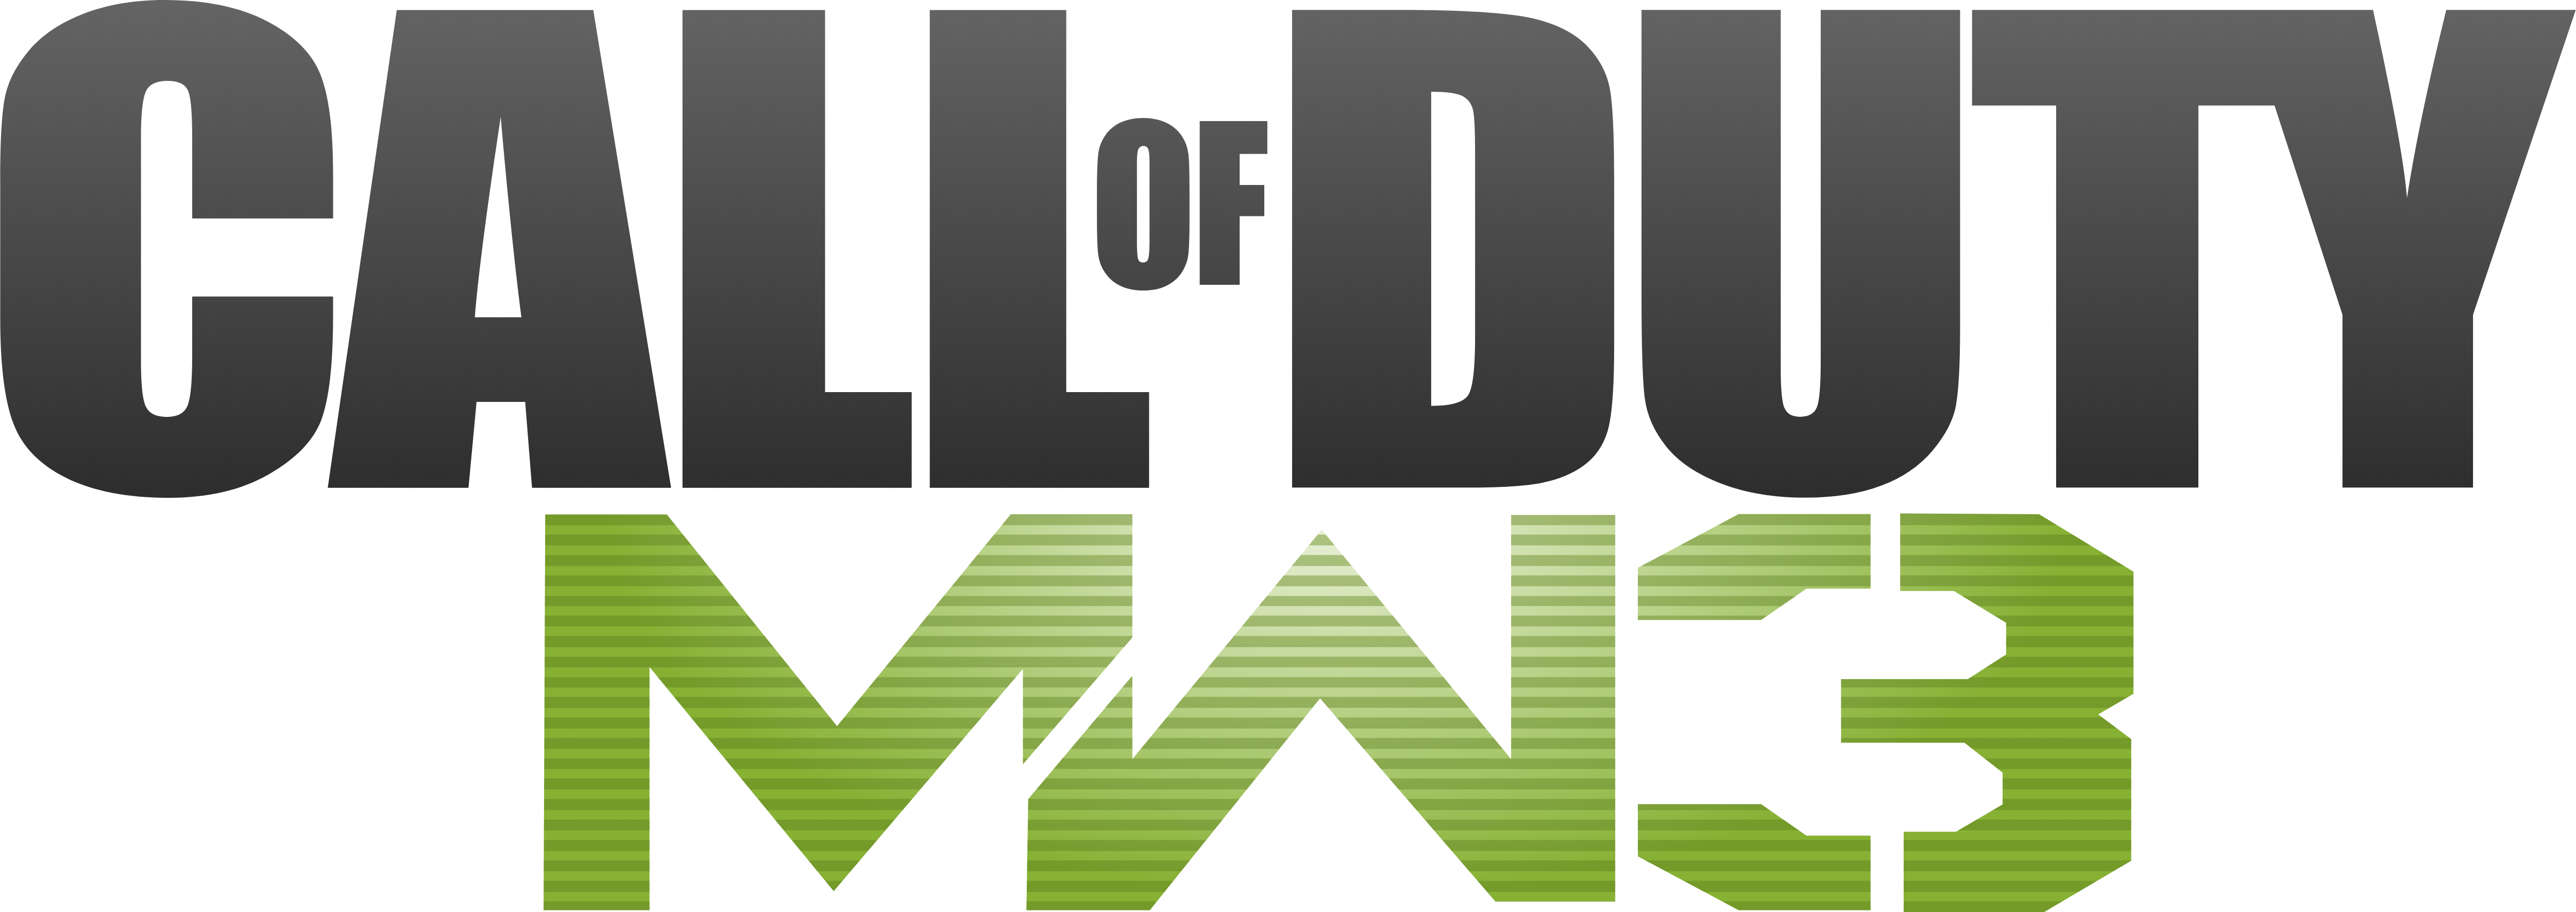 Call Of Duty Logo PNG - 180014